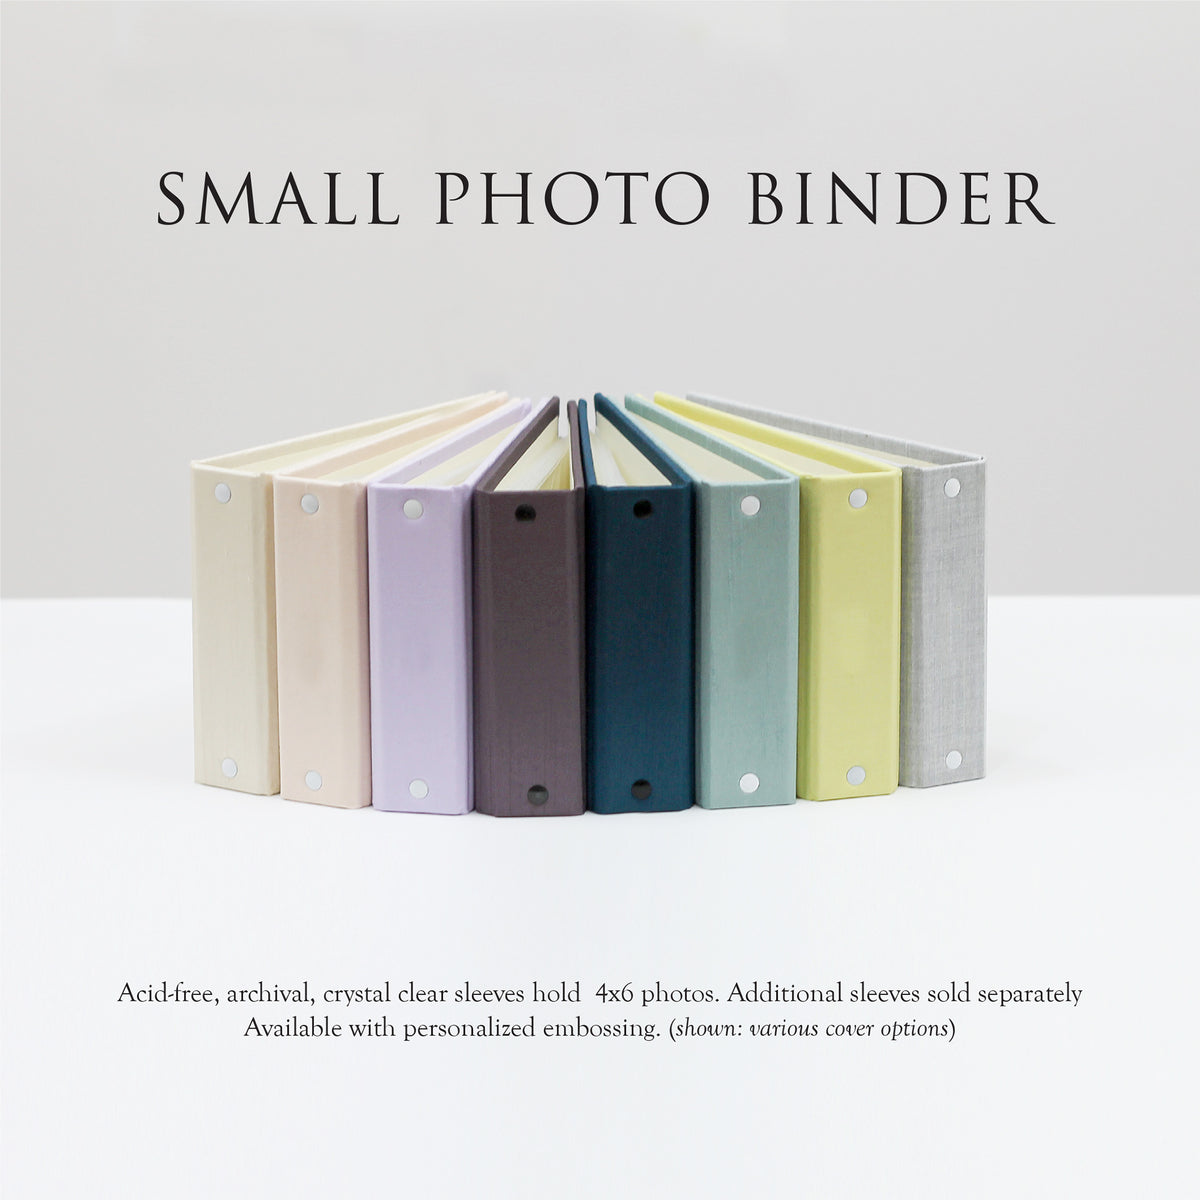 Small Photo Binder | for 4x6 Photos | with Mocha Vegan Leather